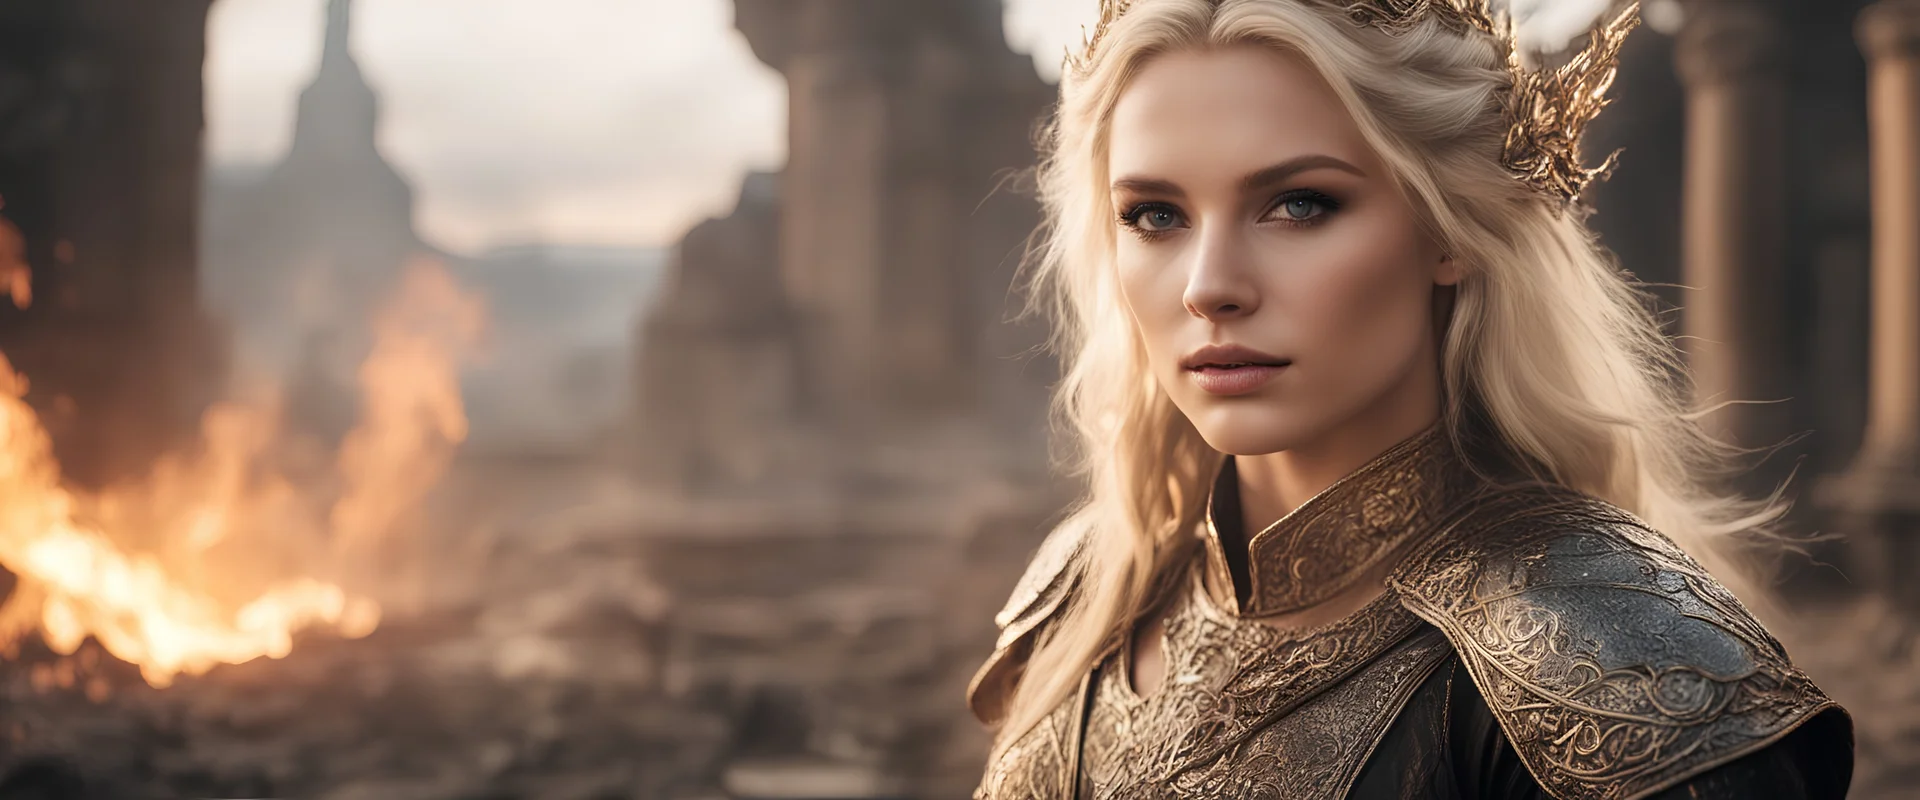 photoreal close-up of a gorgeous 20year old radiant powerful blond half-elf wizard queen in expensive intricate tunic casting an enourmous fireball with heroes blurred in the background near forgotten ruins at golden hour by lee jeffries, otherworldly , in the style of fantasy movies, photorealistic, shot on Hasselblad h6d-400c, zeiss prime lens, bokeh like f/0.8, tilt-shift lens 8k, high detail, smooth render, unreal engine 5, cinema 4d, HDR, dust effect, vivid colors